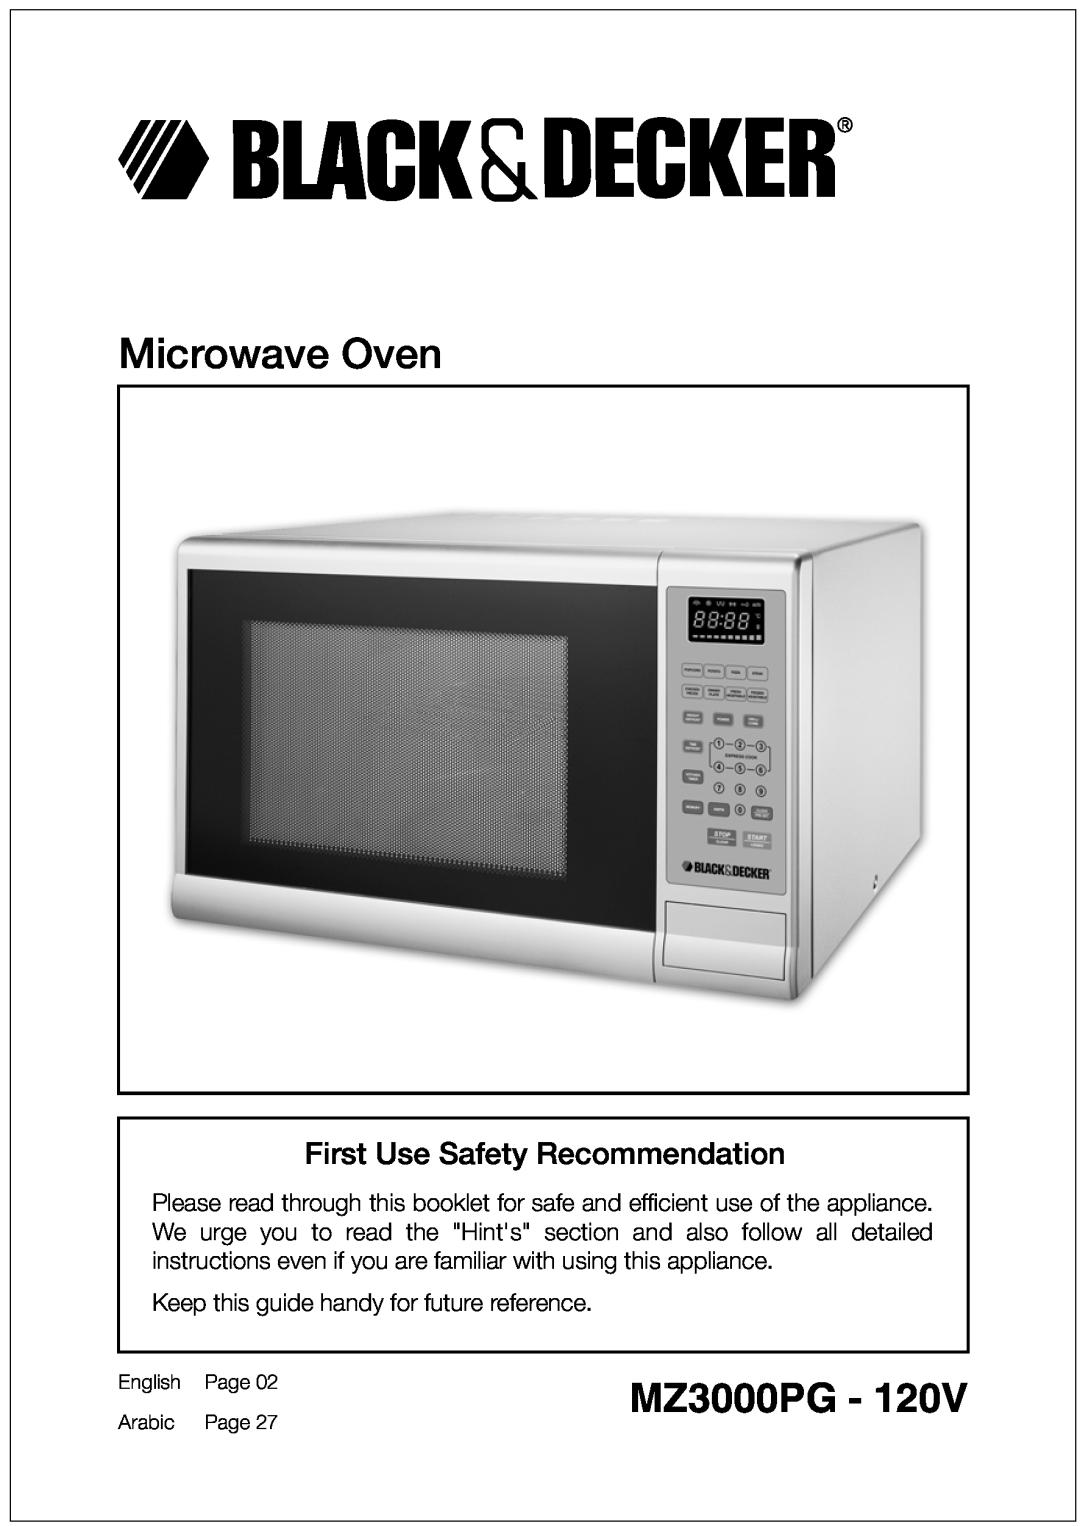 Black & Decker MZ3000PGSA Microwave Oven, First Use Safety Recommendation, Keep this guide handy for future reference 